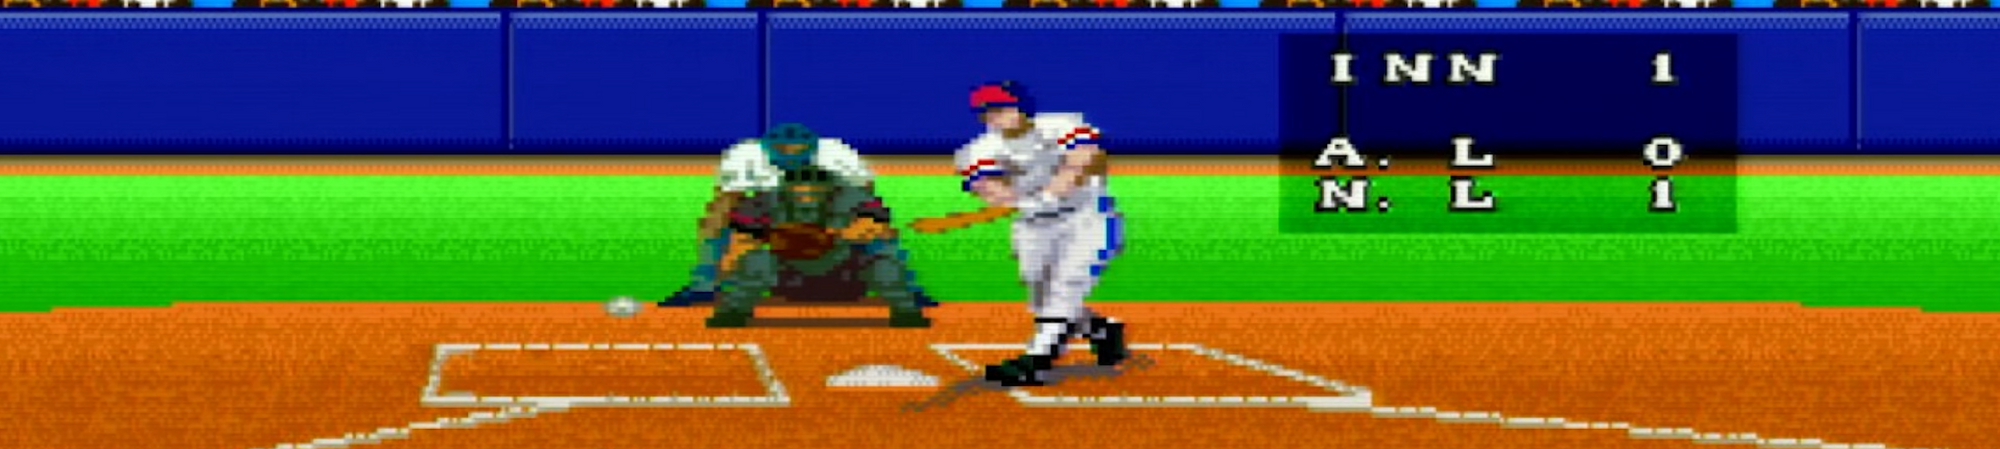 (SNES) Baseball Sports Review 1